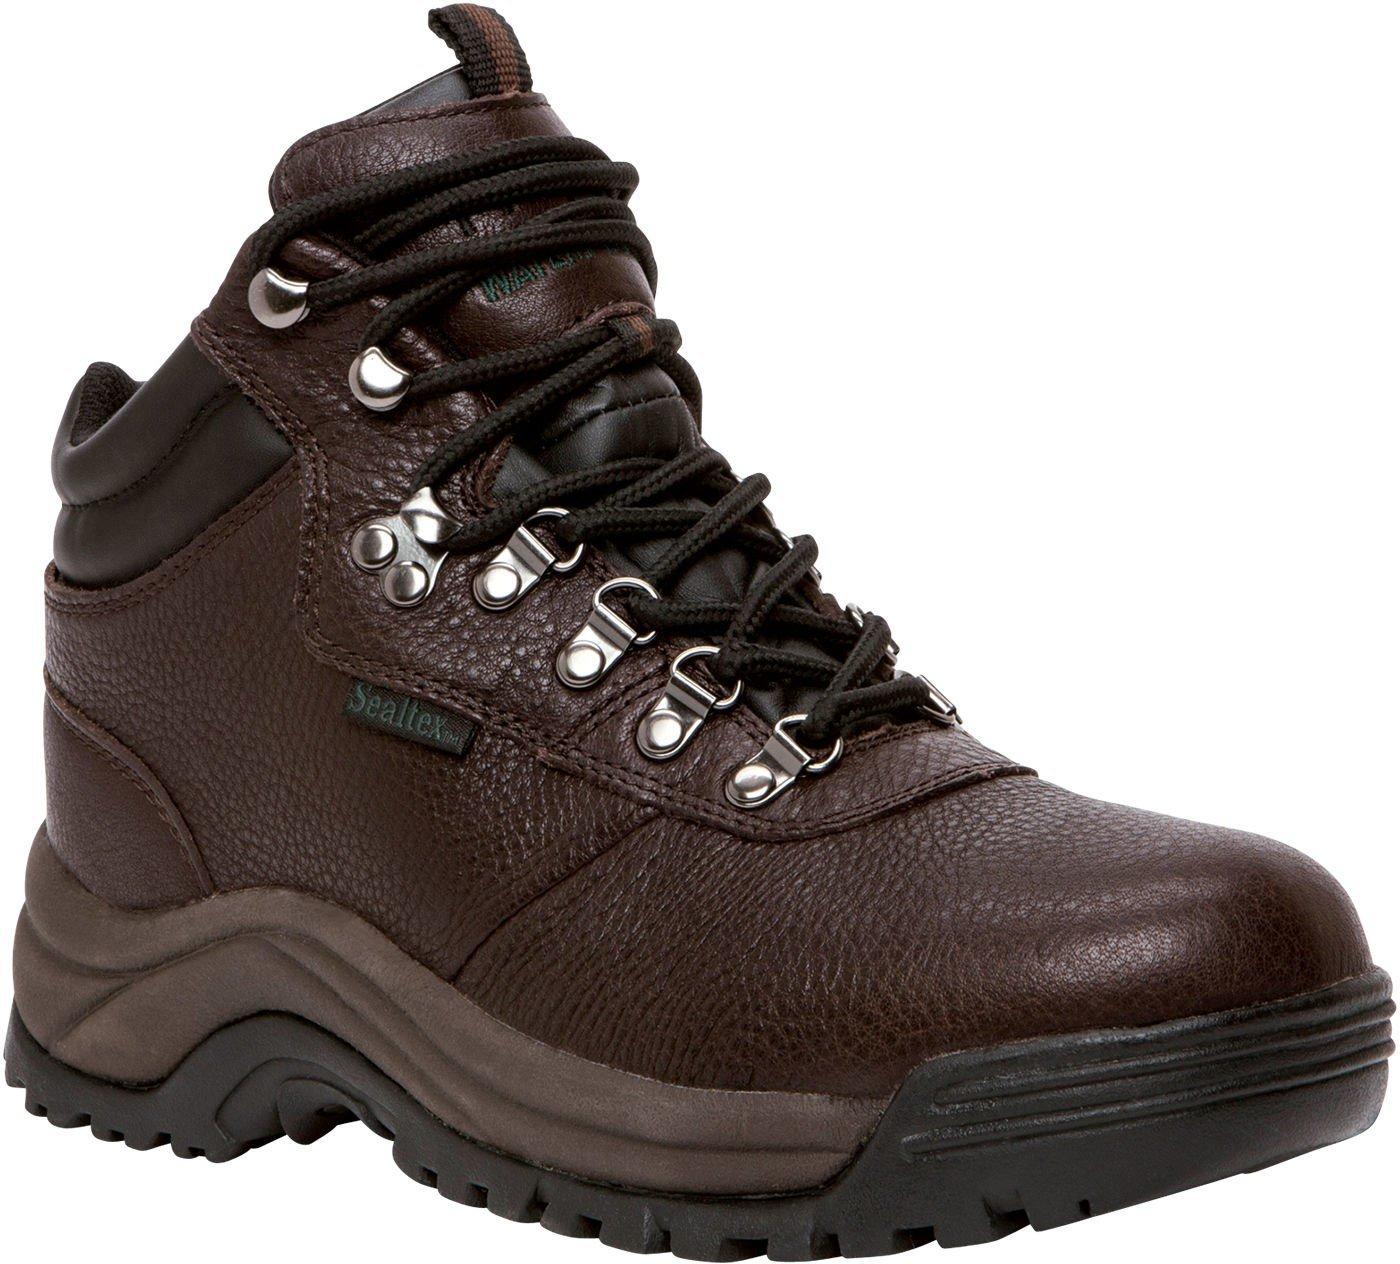 Propet USA Mens Cliff Walker Lace Up Boots